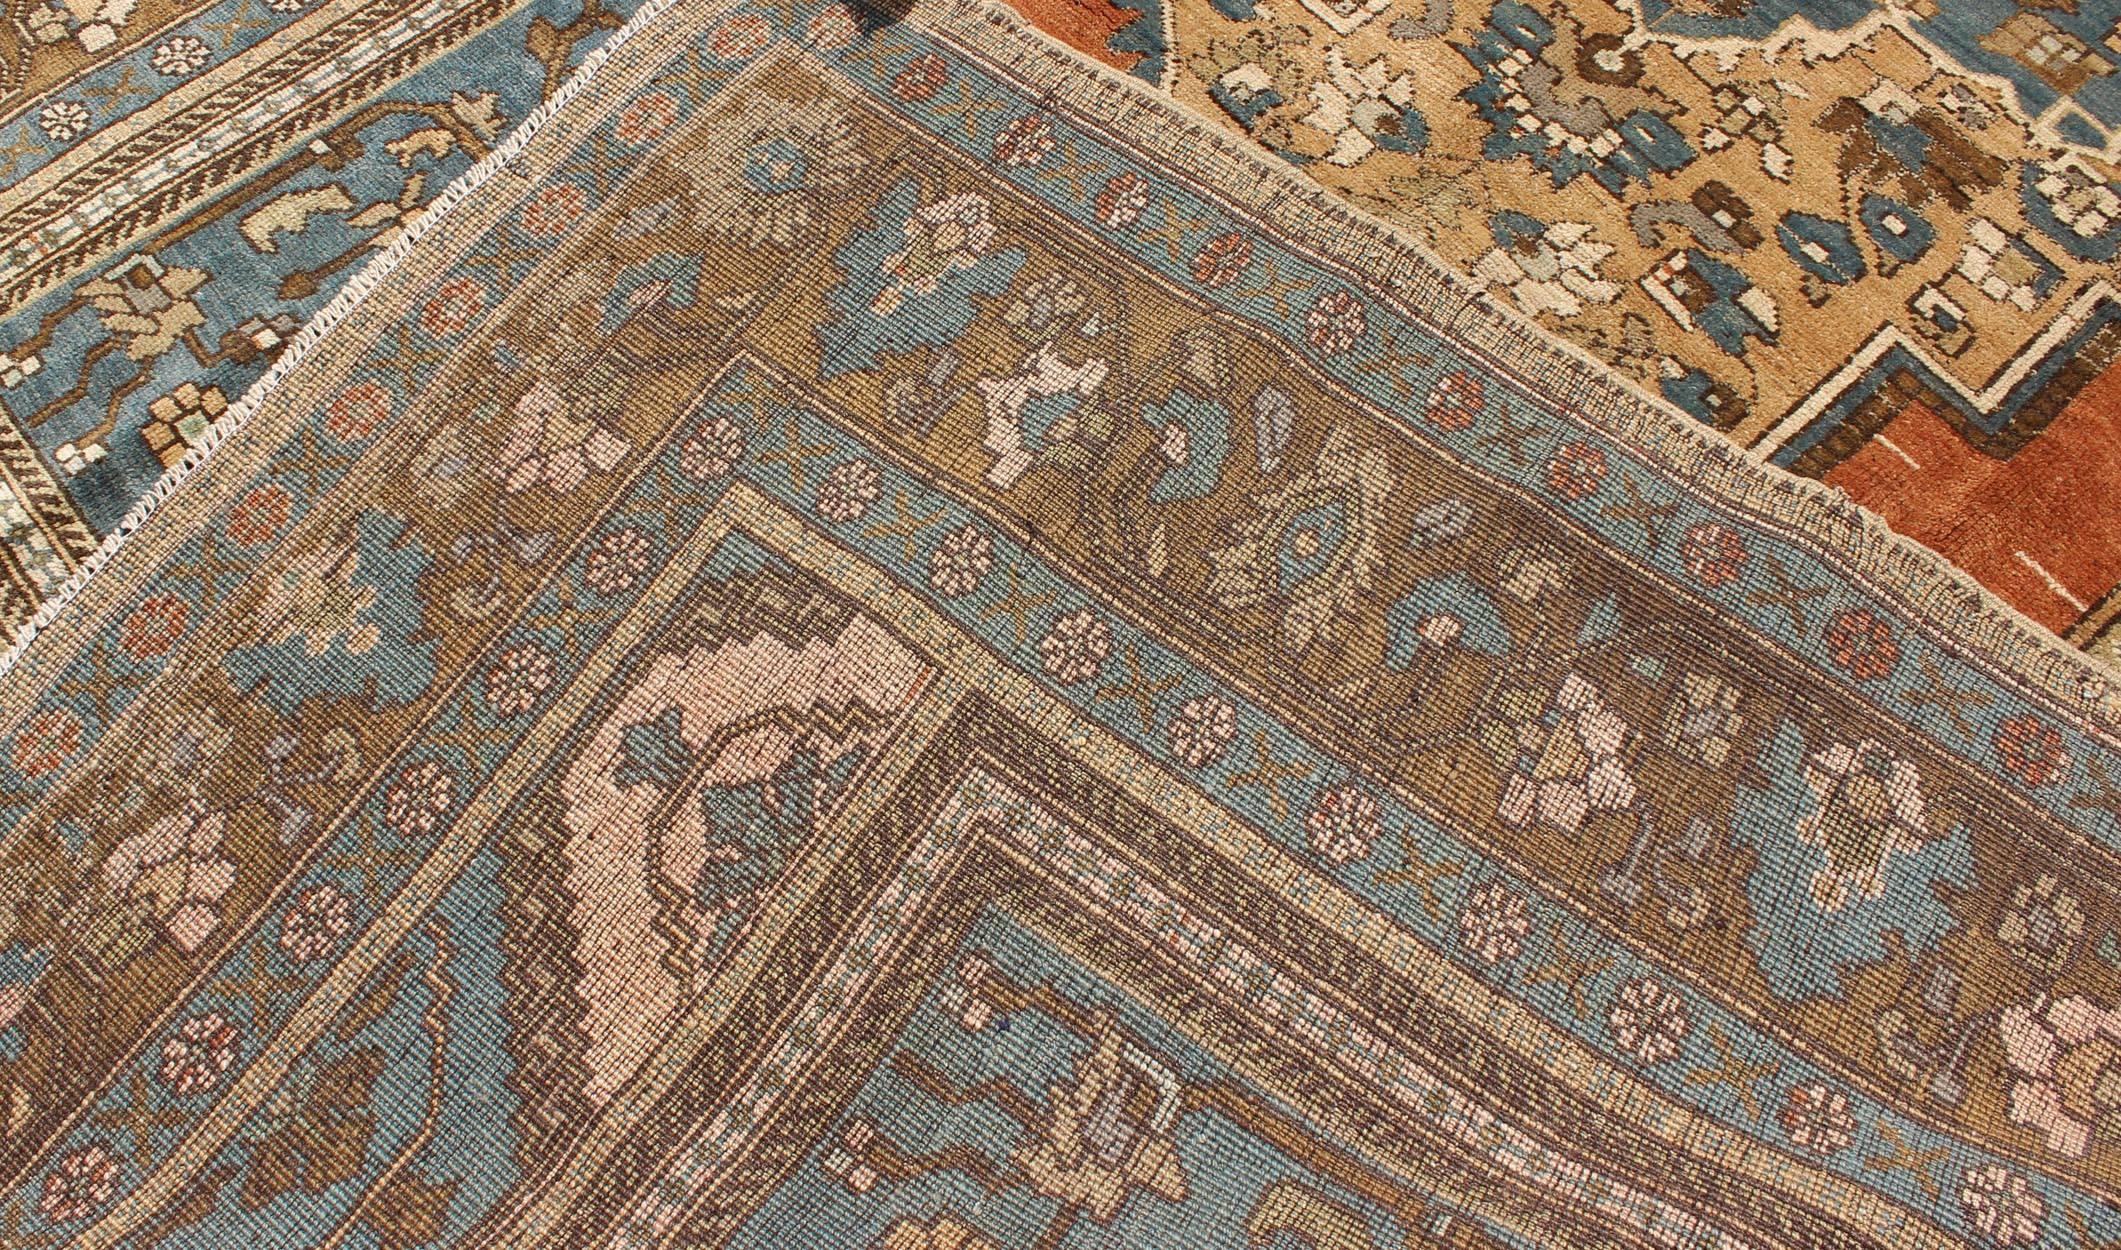 Antique Turkish Colorful Oushak Gallery Rug In Blue Brown & Terra-cotta For Sale 2